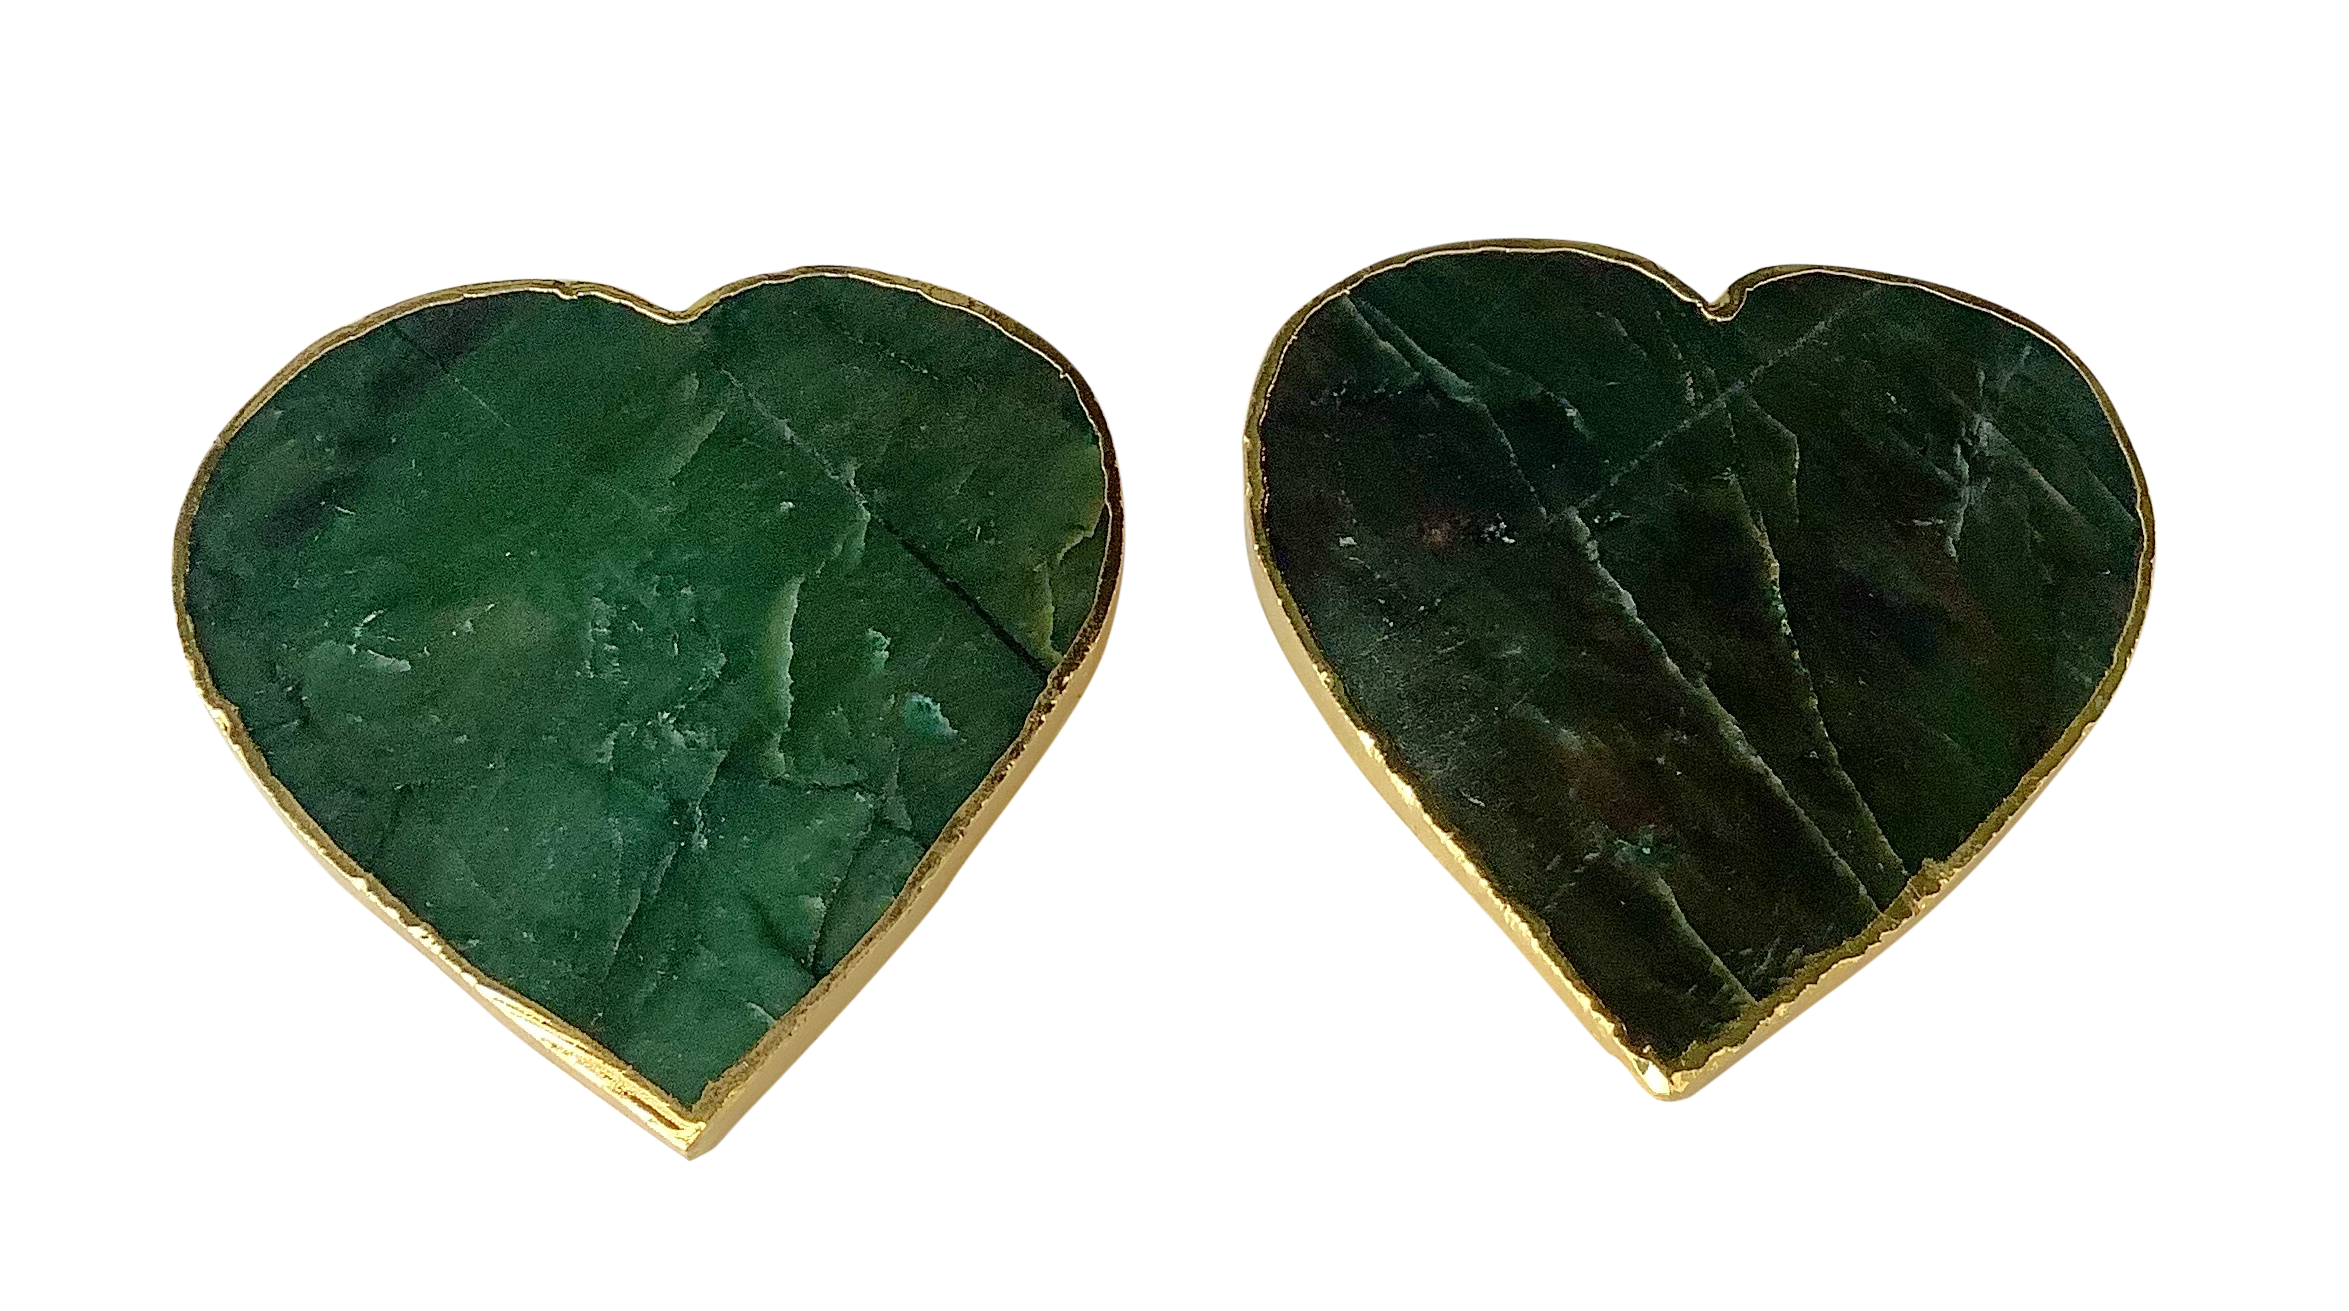 Blood Stone Crystal Coaster Heart Shaped 2 Pieces Gold